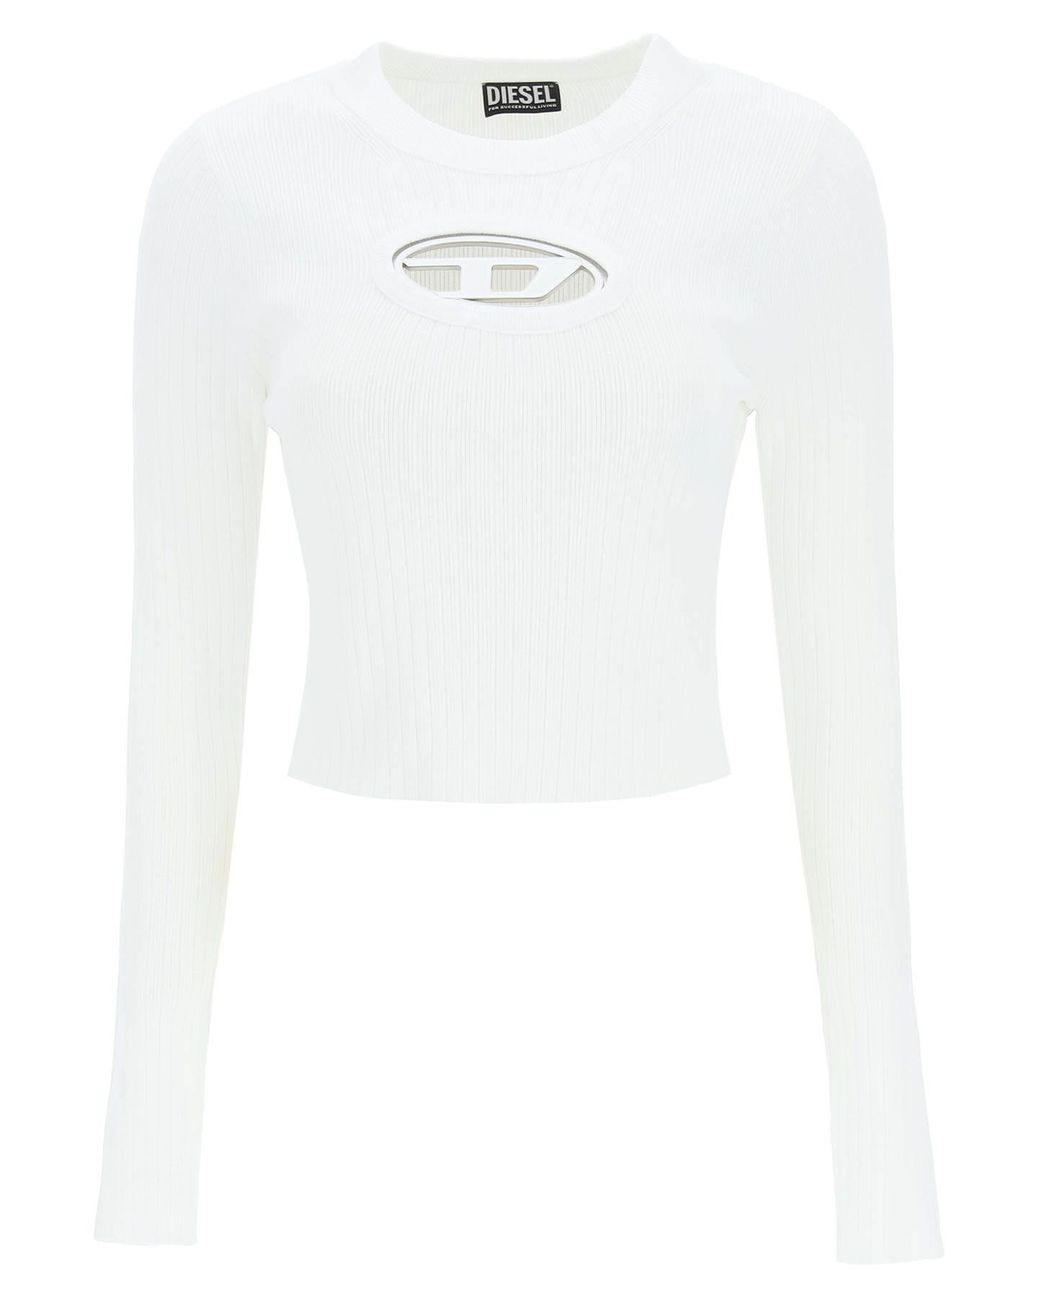 Odel White Cut Out Crop Top